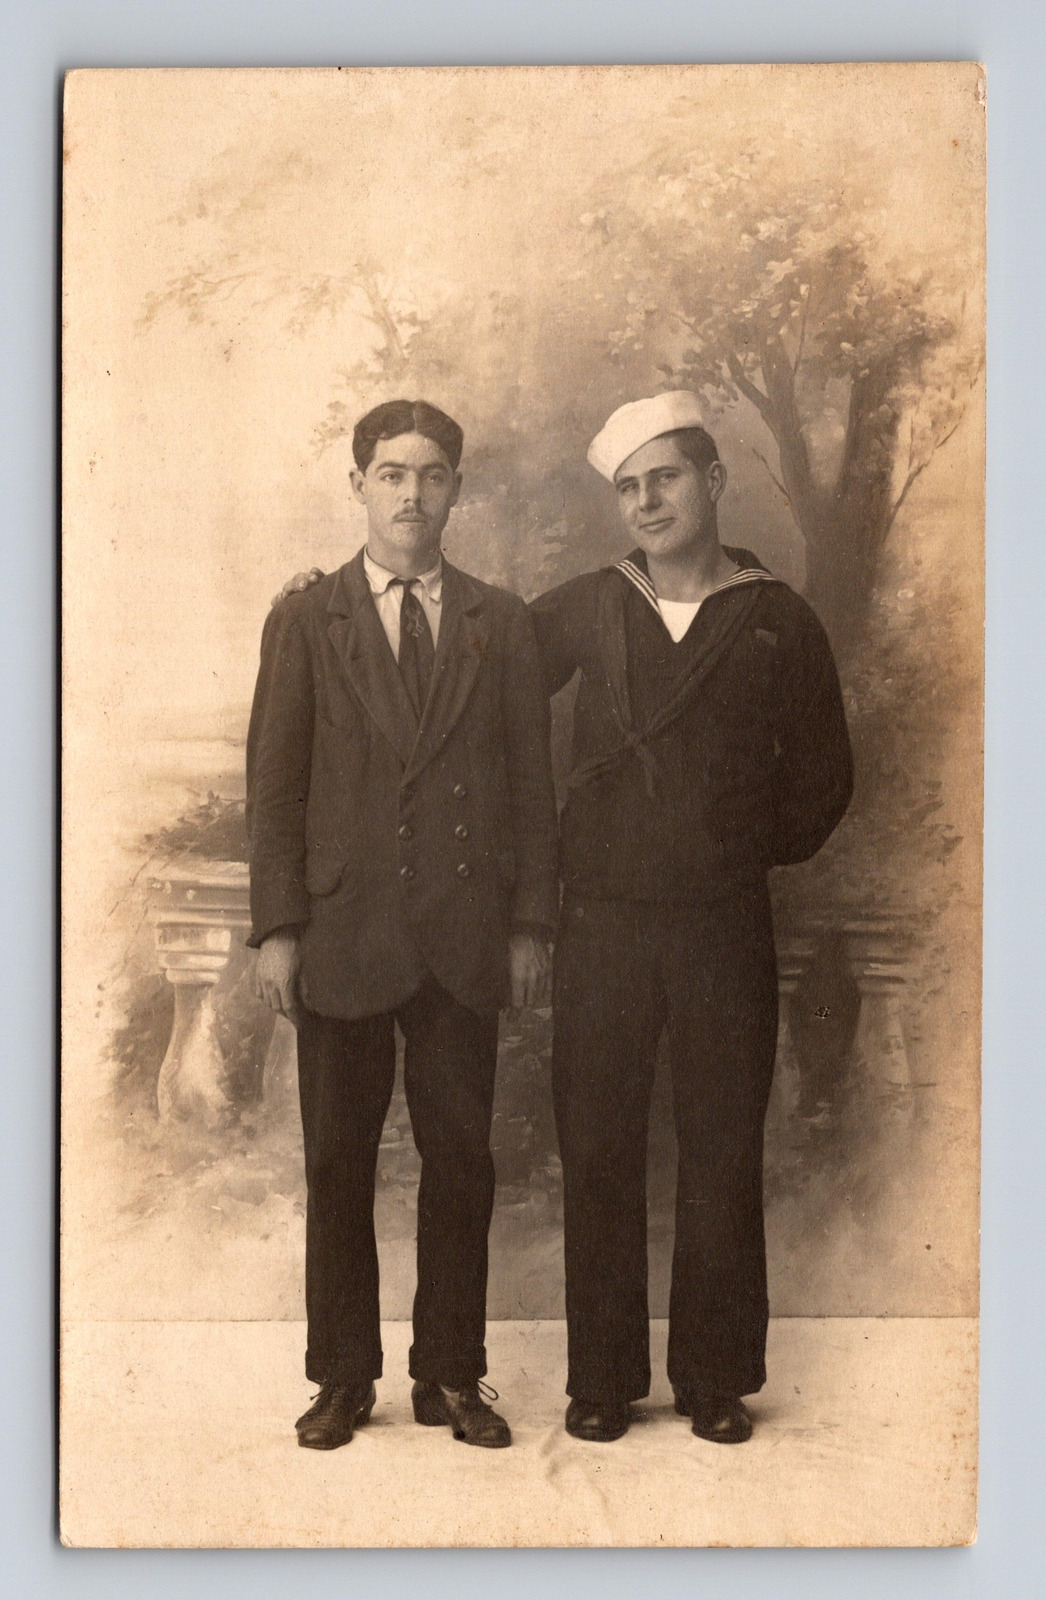 c1910-1924 RPPC Postcard Portrait of Two Men Sailor and Man in Suit Brothers?